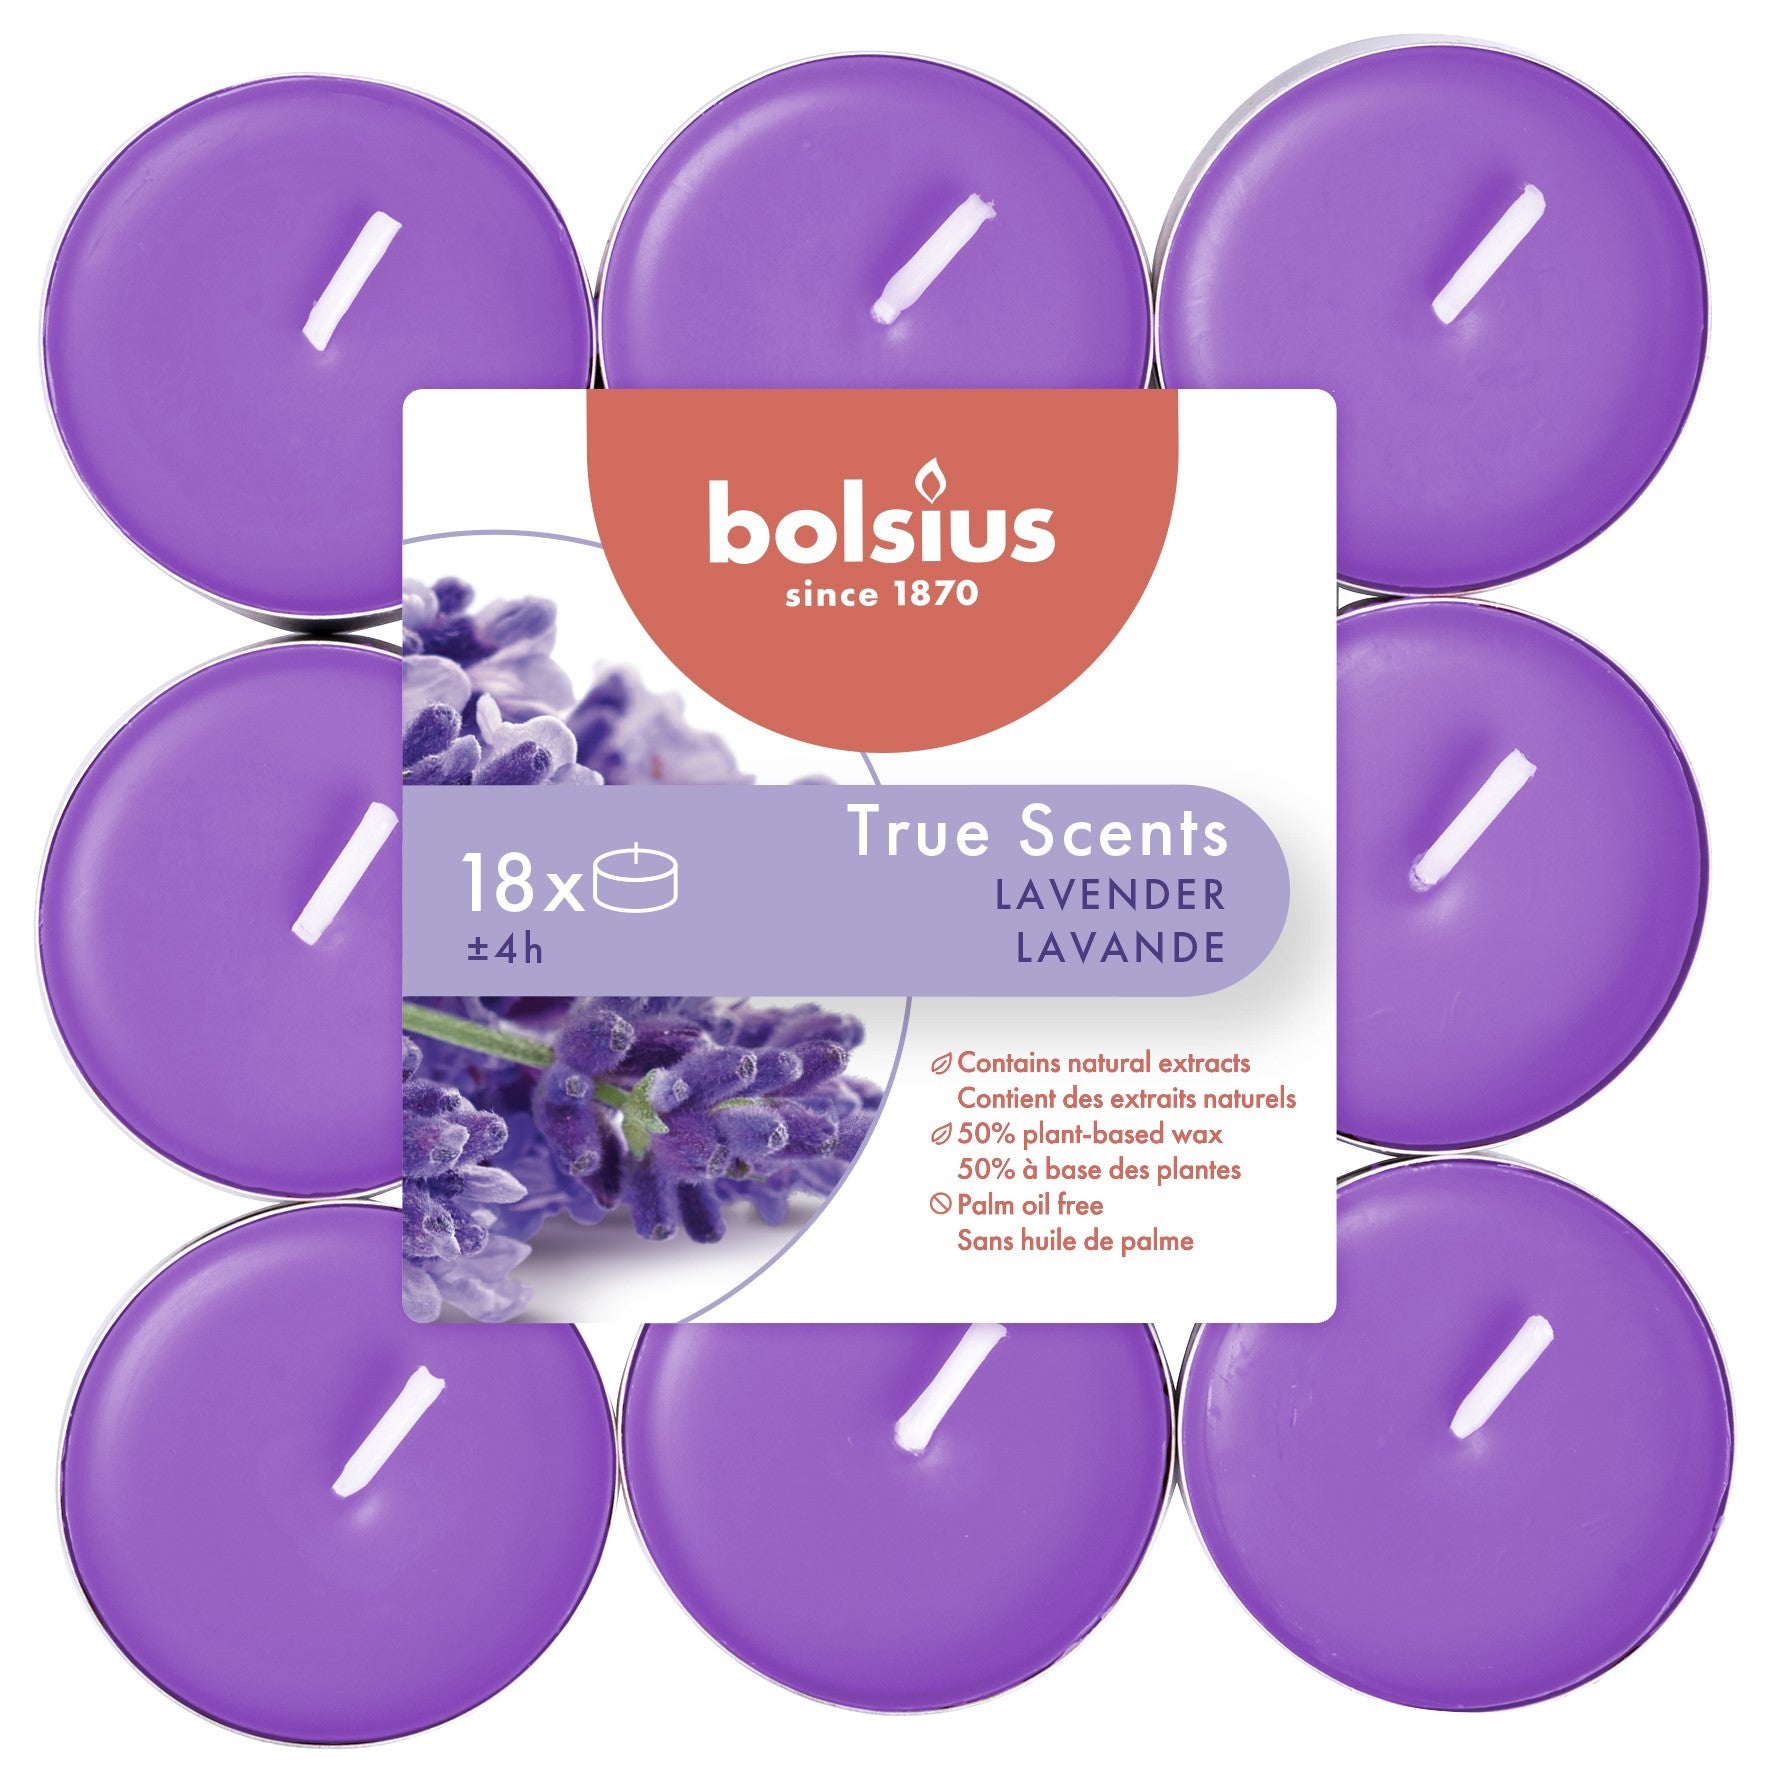 View Lavender Bolsius Tealights pack of 18 information